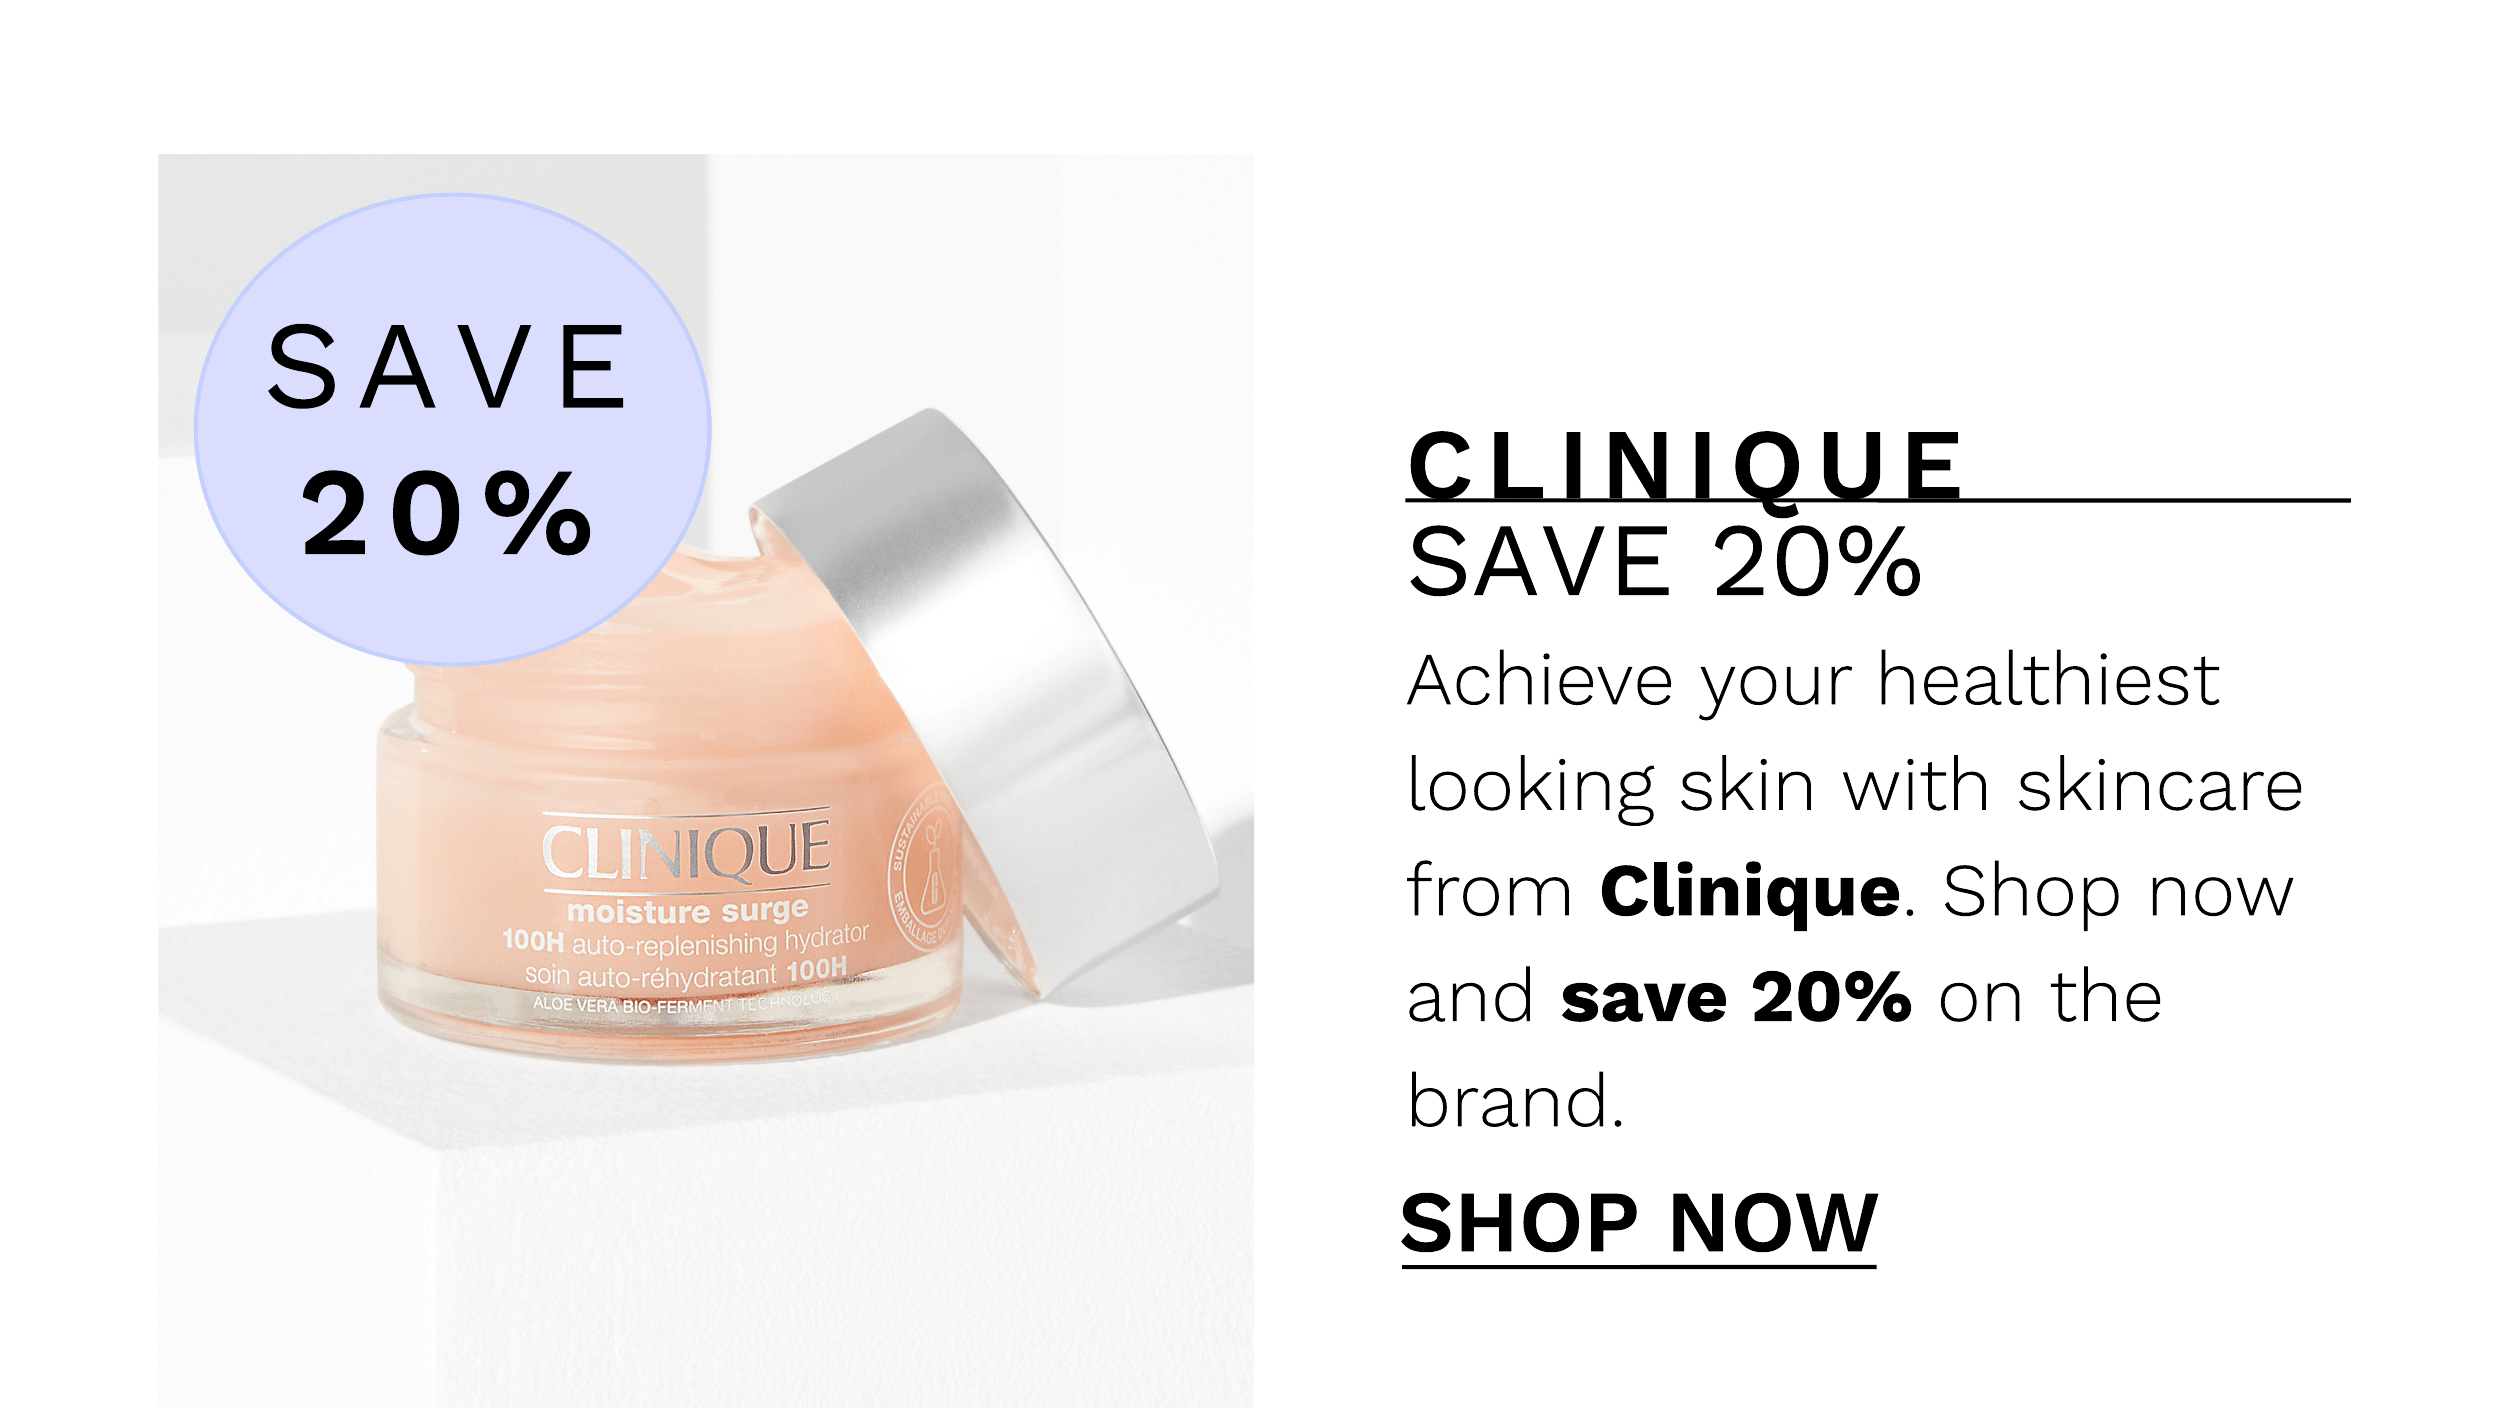  SAVE 20% Achieve your healthiest looking skin with skincare from Clinique. Shop now and save 20% on the brand. SHOP NOW 